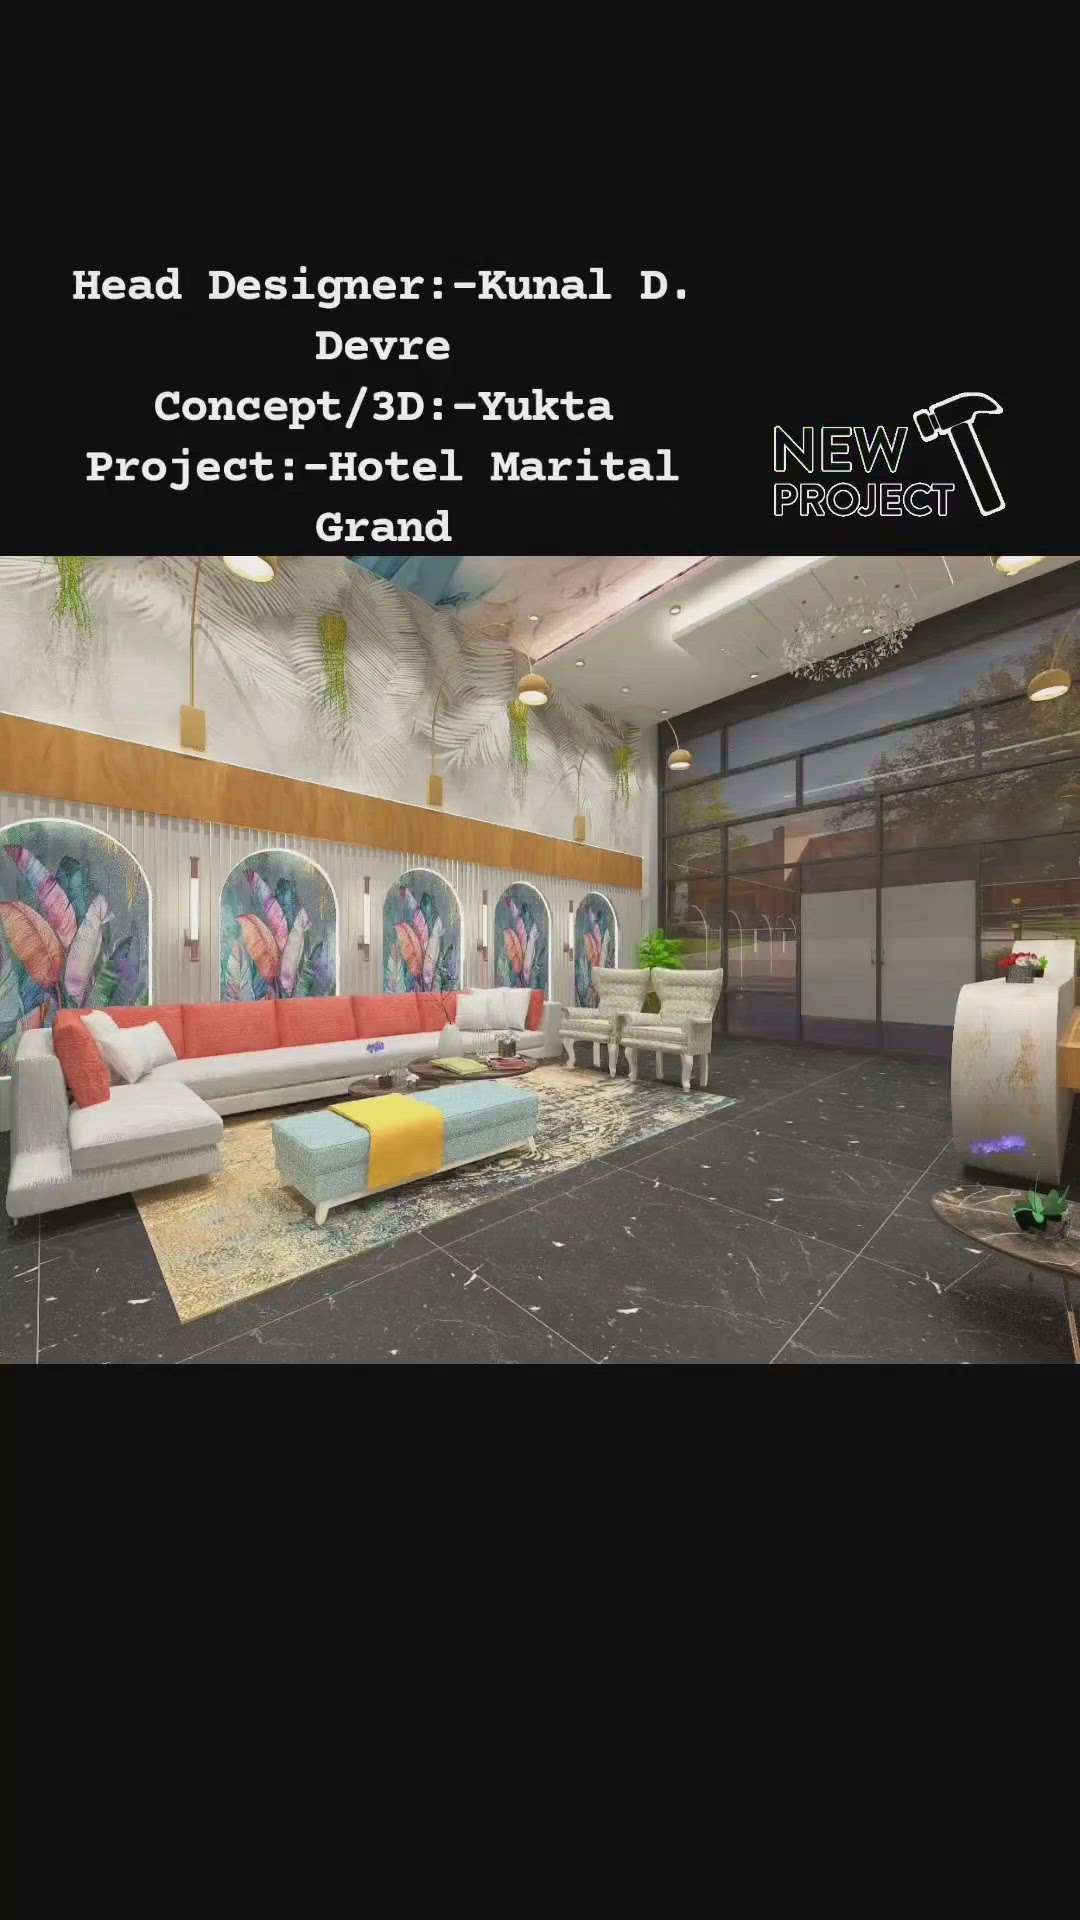 Project :- Hotel Marital Grand
Project by :- @deep_interiors_aand_designs
Cheif Designer :- @kunal_d_devre
Design & concept :- @___yukta_bhalerao_
Area :- 1100 sq.ft.
Property :- Commercial
Project status :- Upcoming
.
.
.
.
.
#interiordesigns #ceilingdesign #ceiling #interiordesign #interiordesigners #furnituredesigner #devre #family #architecture